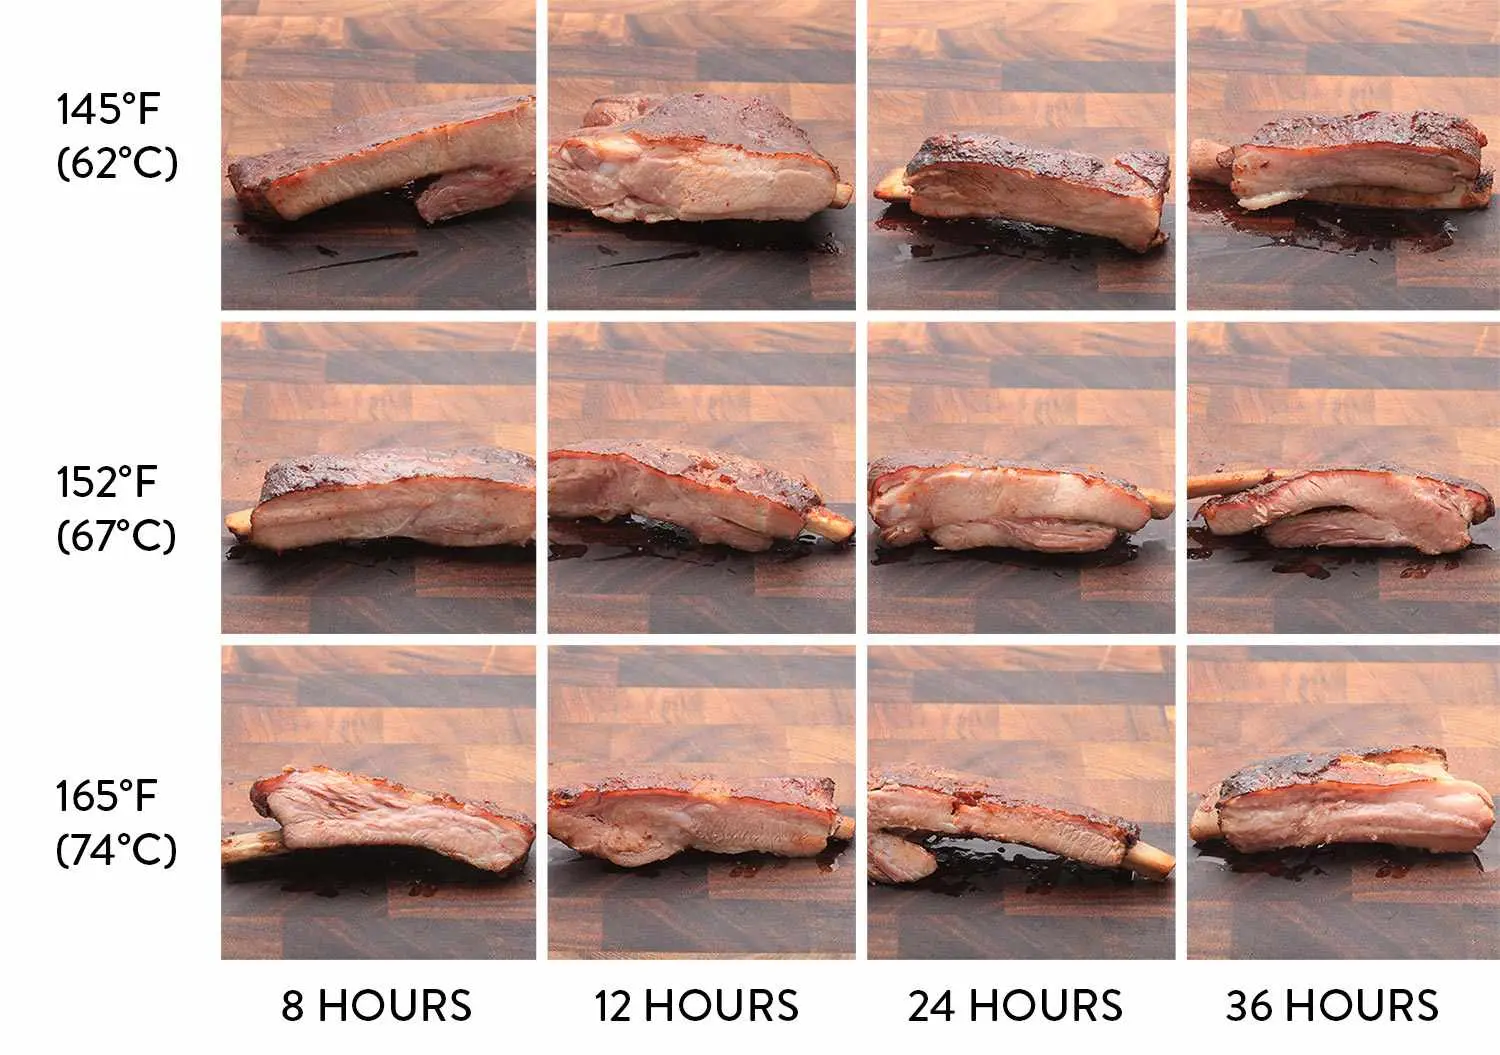 temperature of smoked ribs - What temperature is smoked ribs done